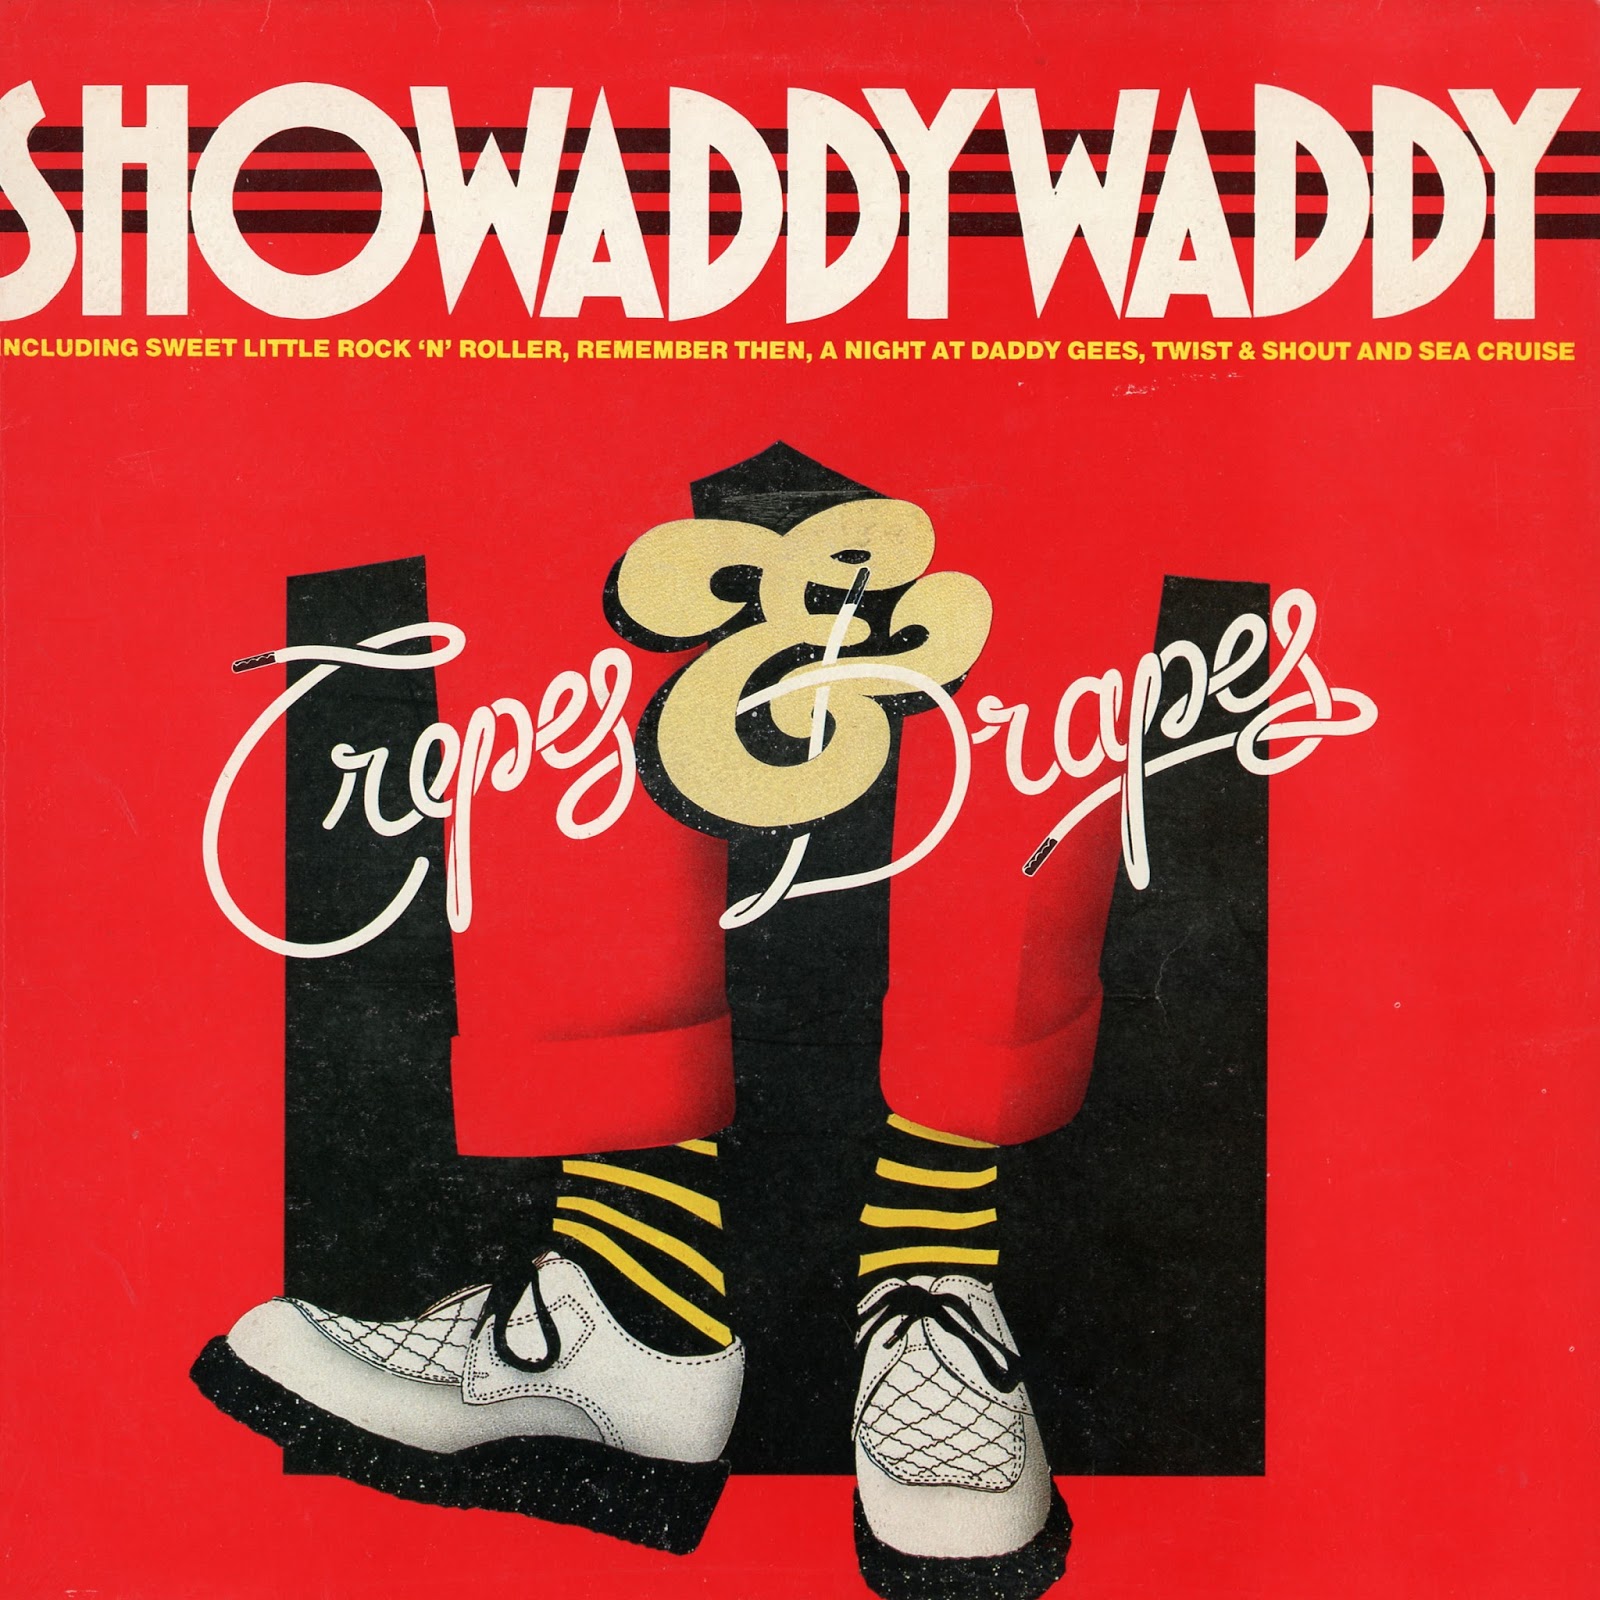 Daddy night. Showaddywaddy. Twist and Rock n Roll. Rackets and Drapes группа. Showaddywaddy 25 steps to the Top.